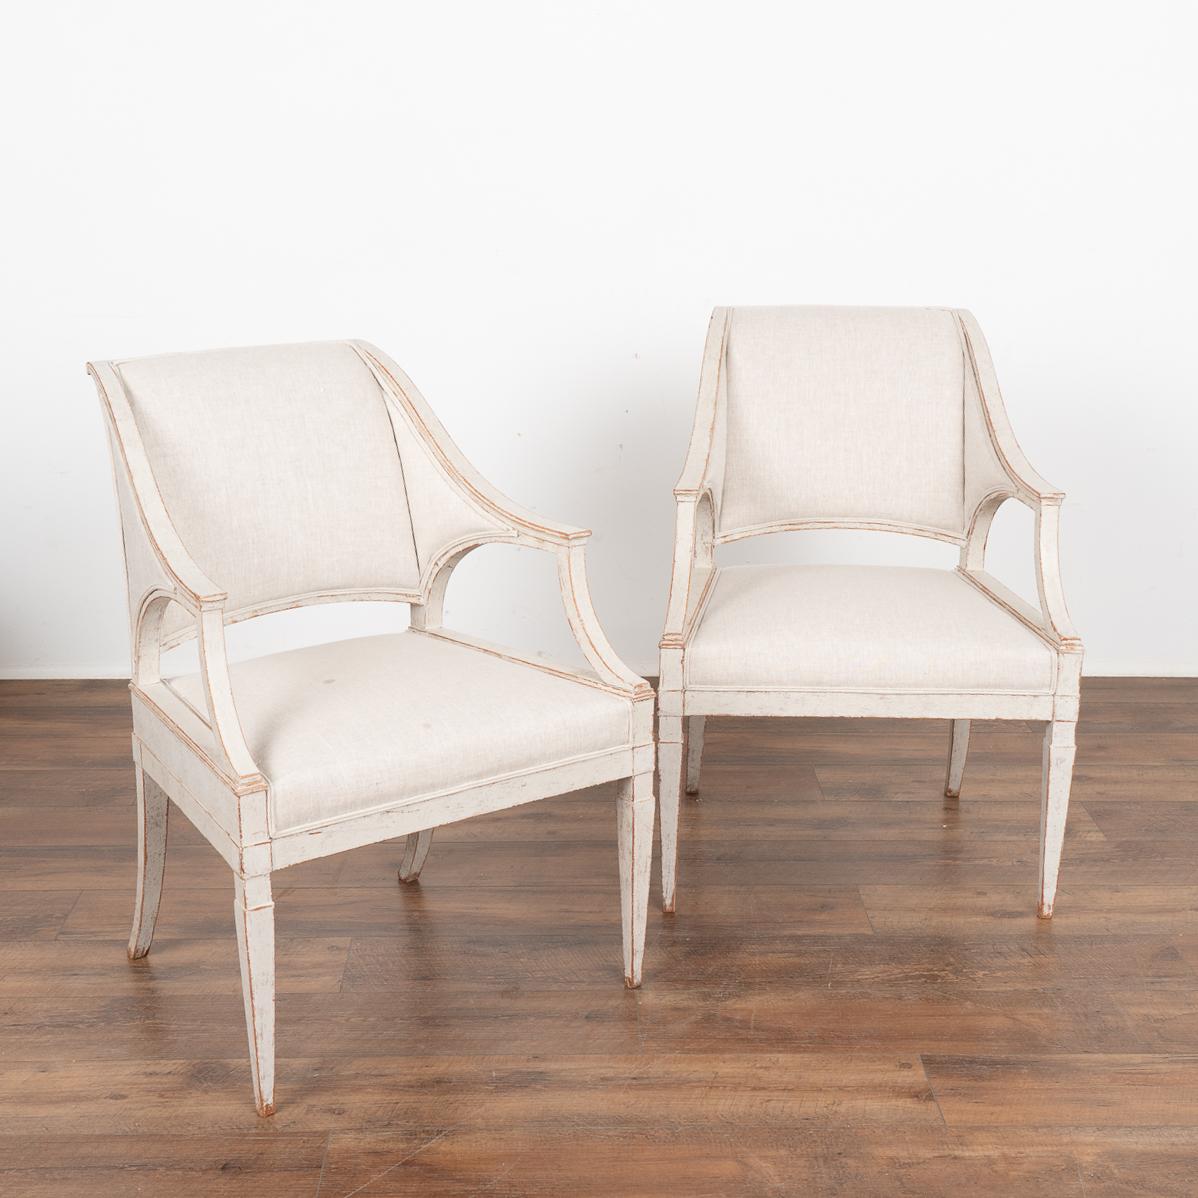 19th Century Set of Four Swedish Gustavian White Painted Arm Chairs, circa 1820-40